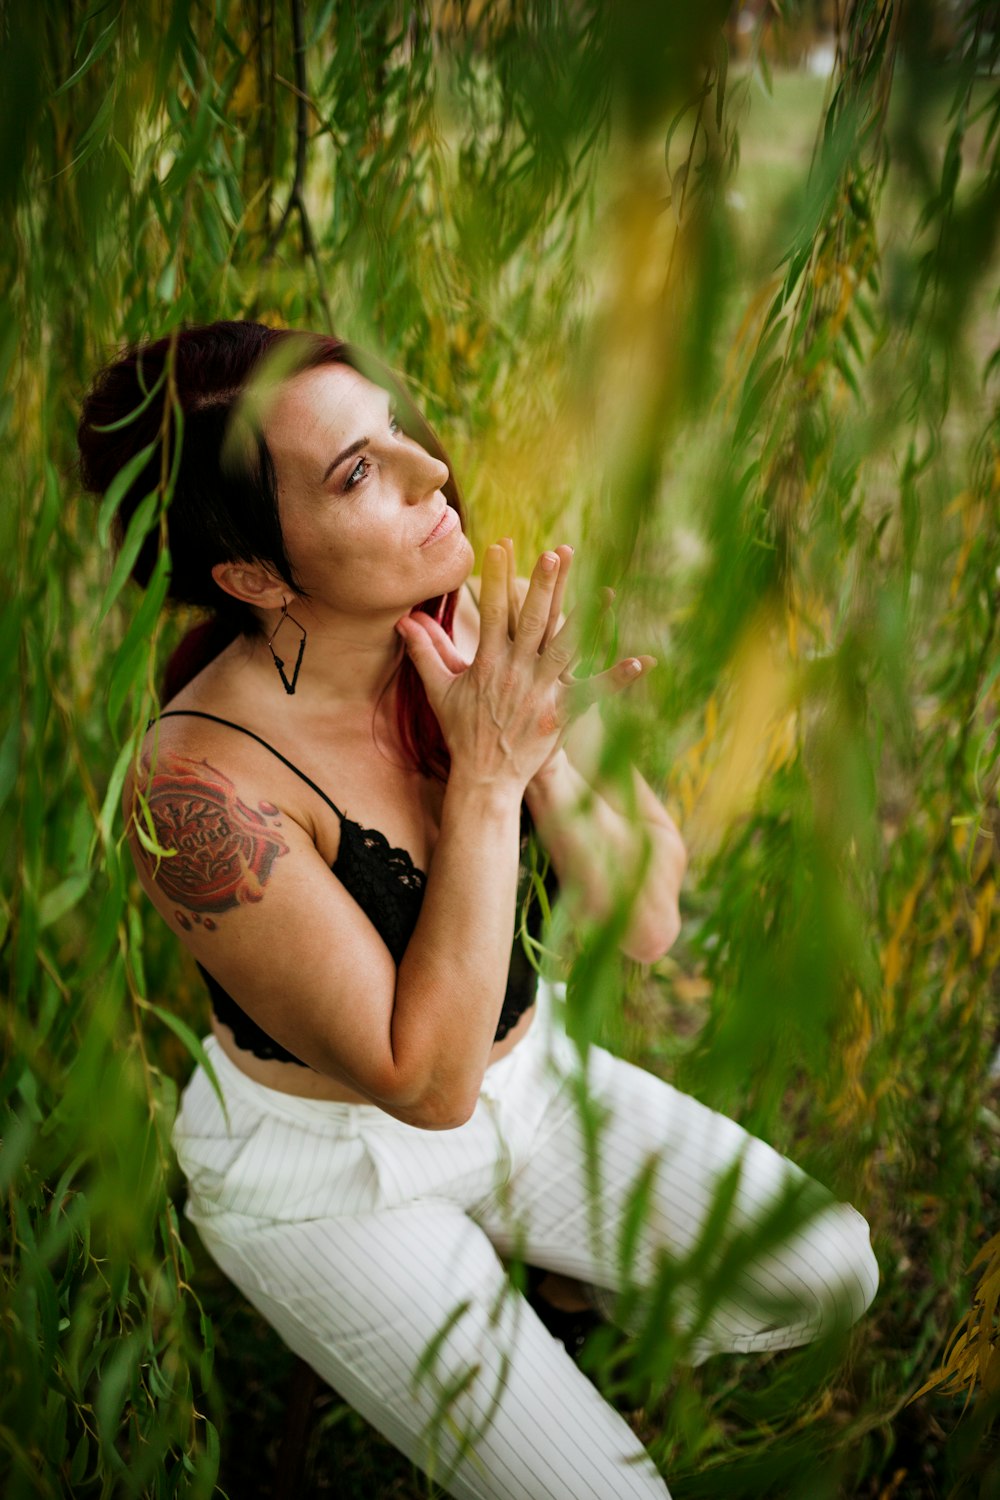 a woman sitting in a grassy area